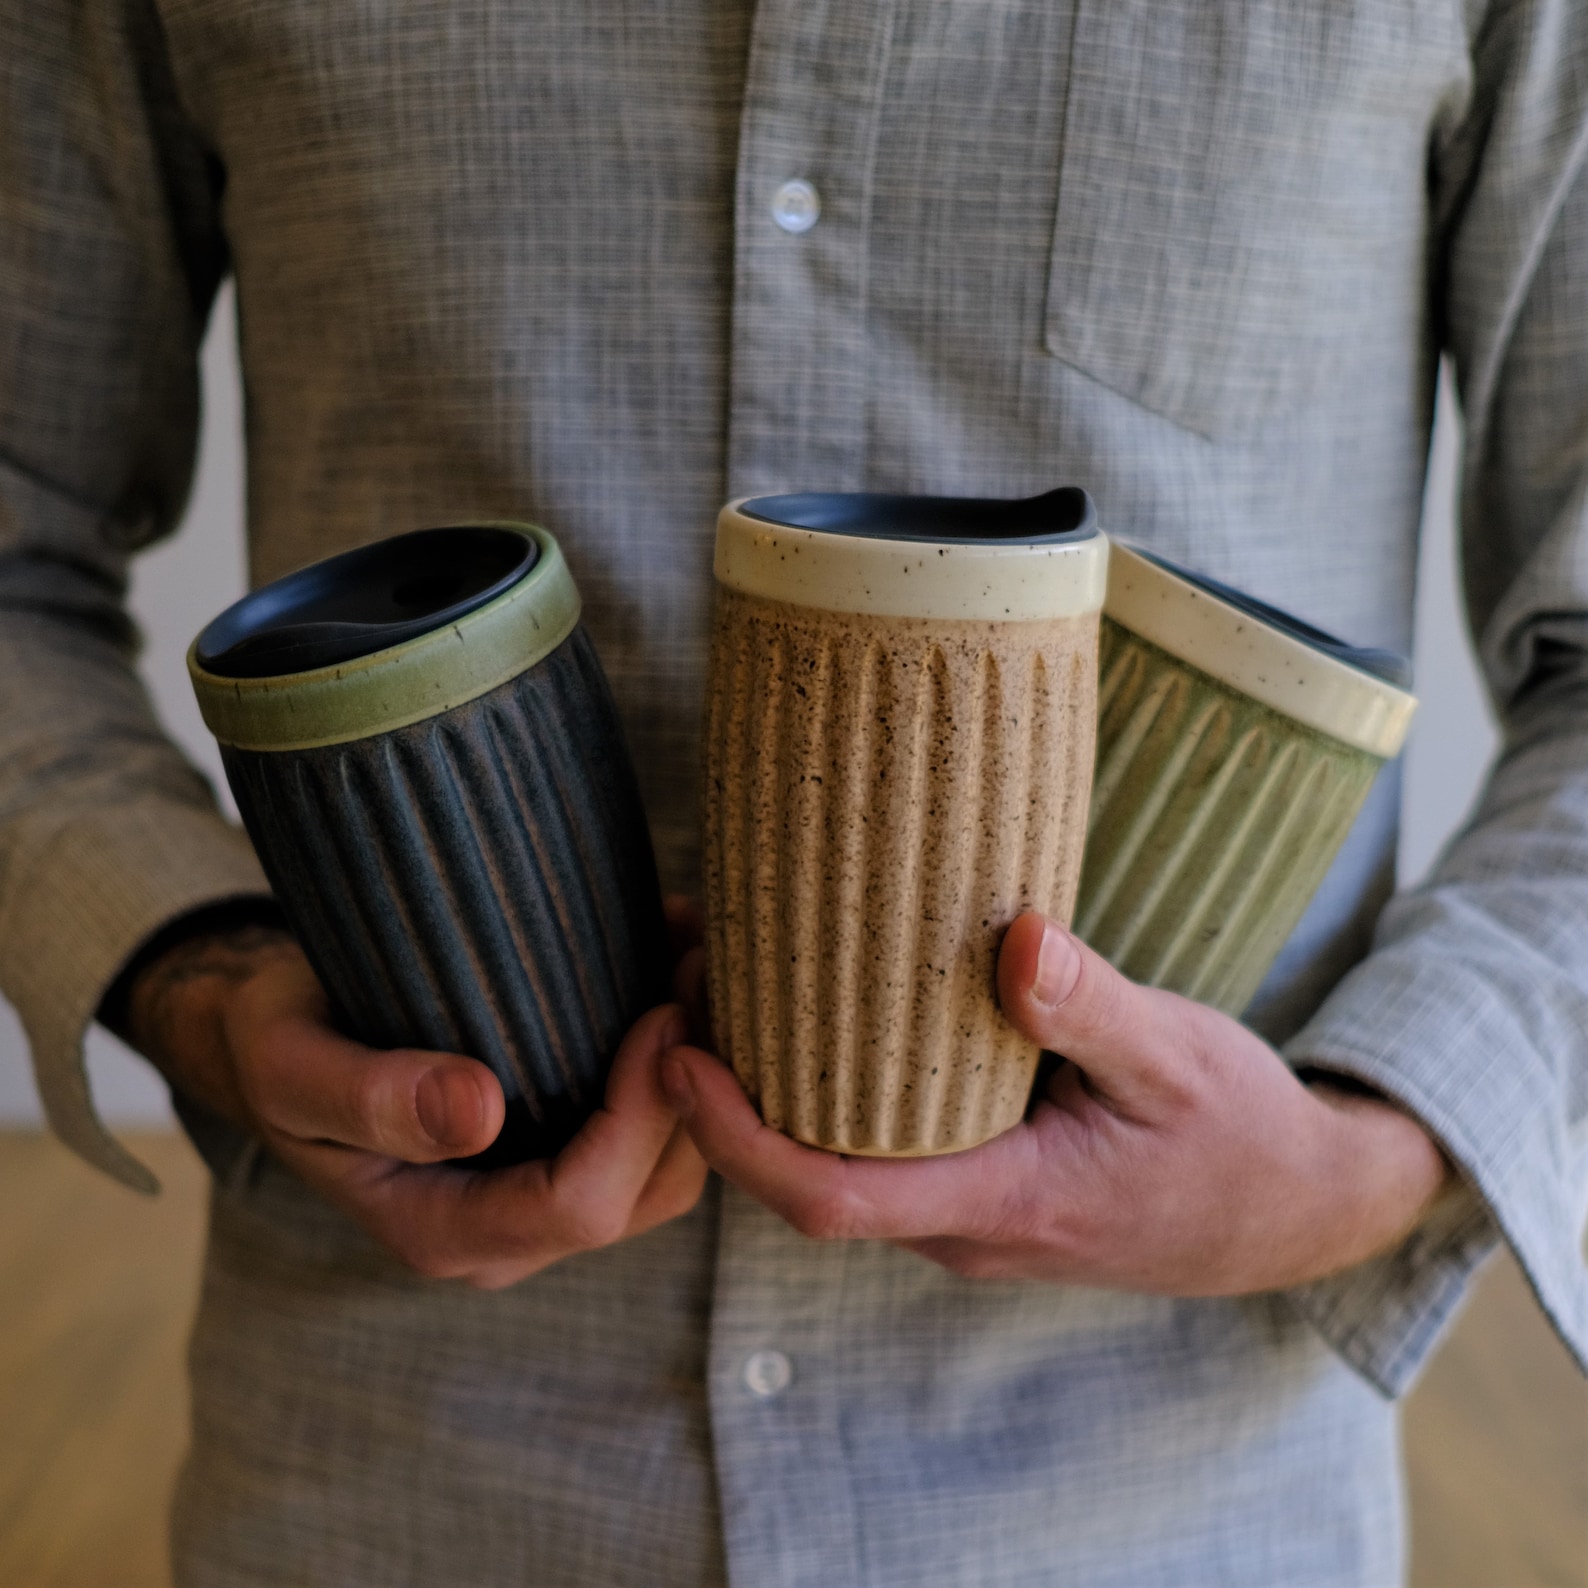 A collection of three ceramic travel mugs being held in a man's arms